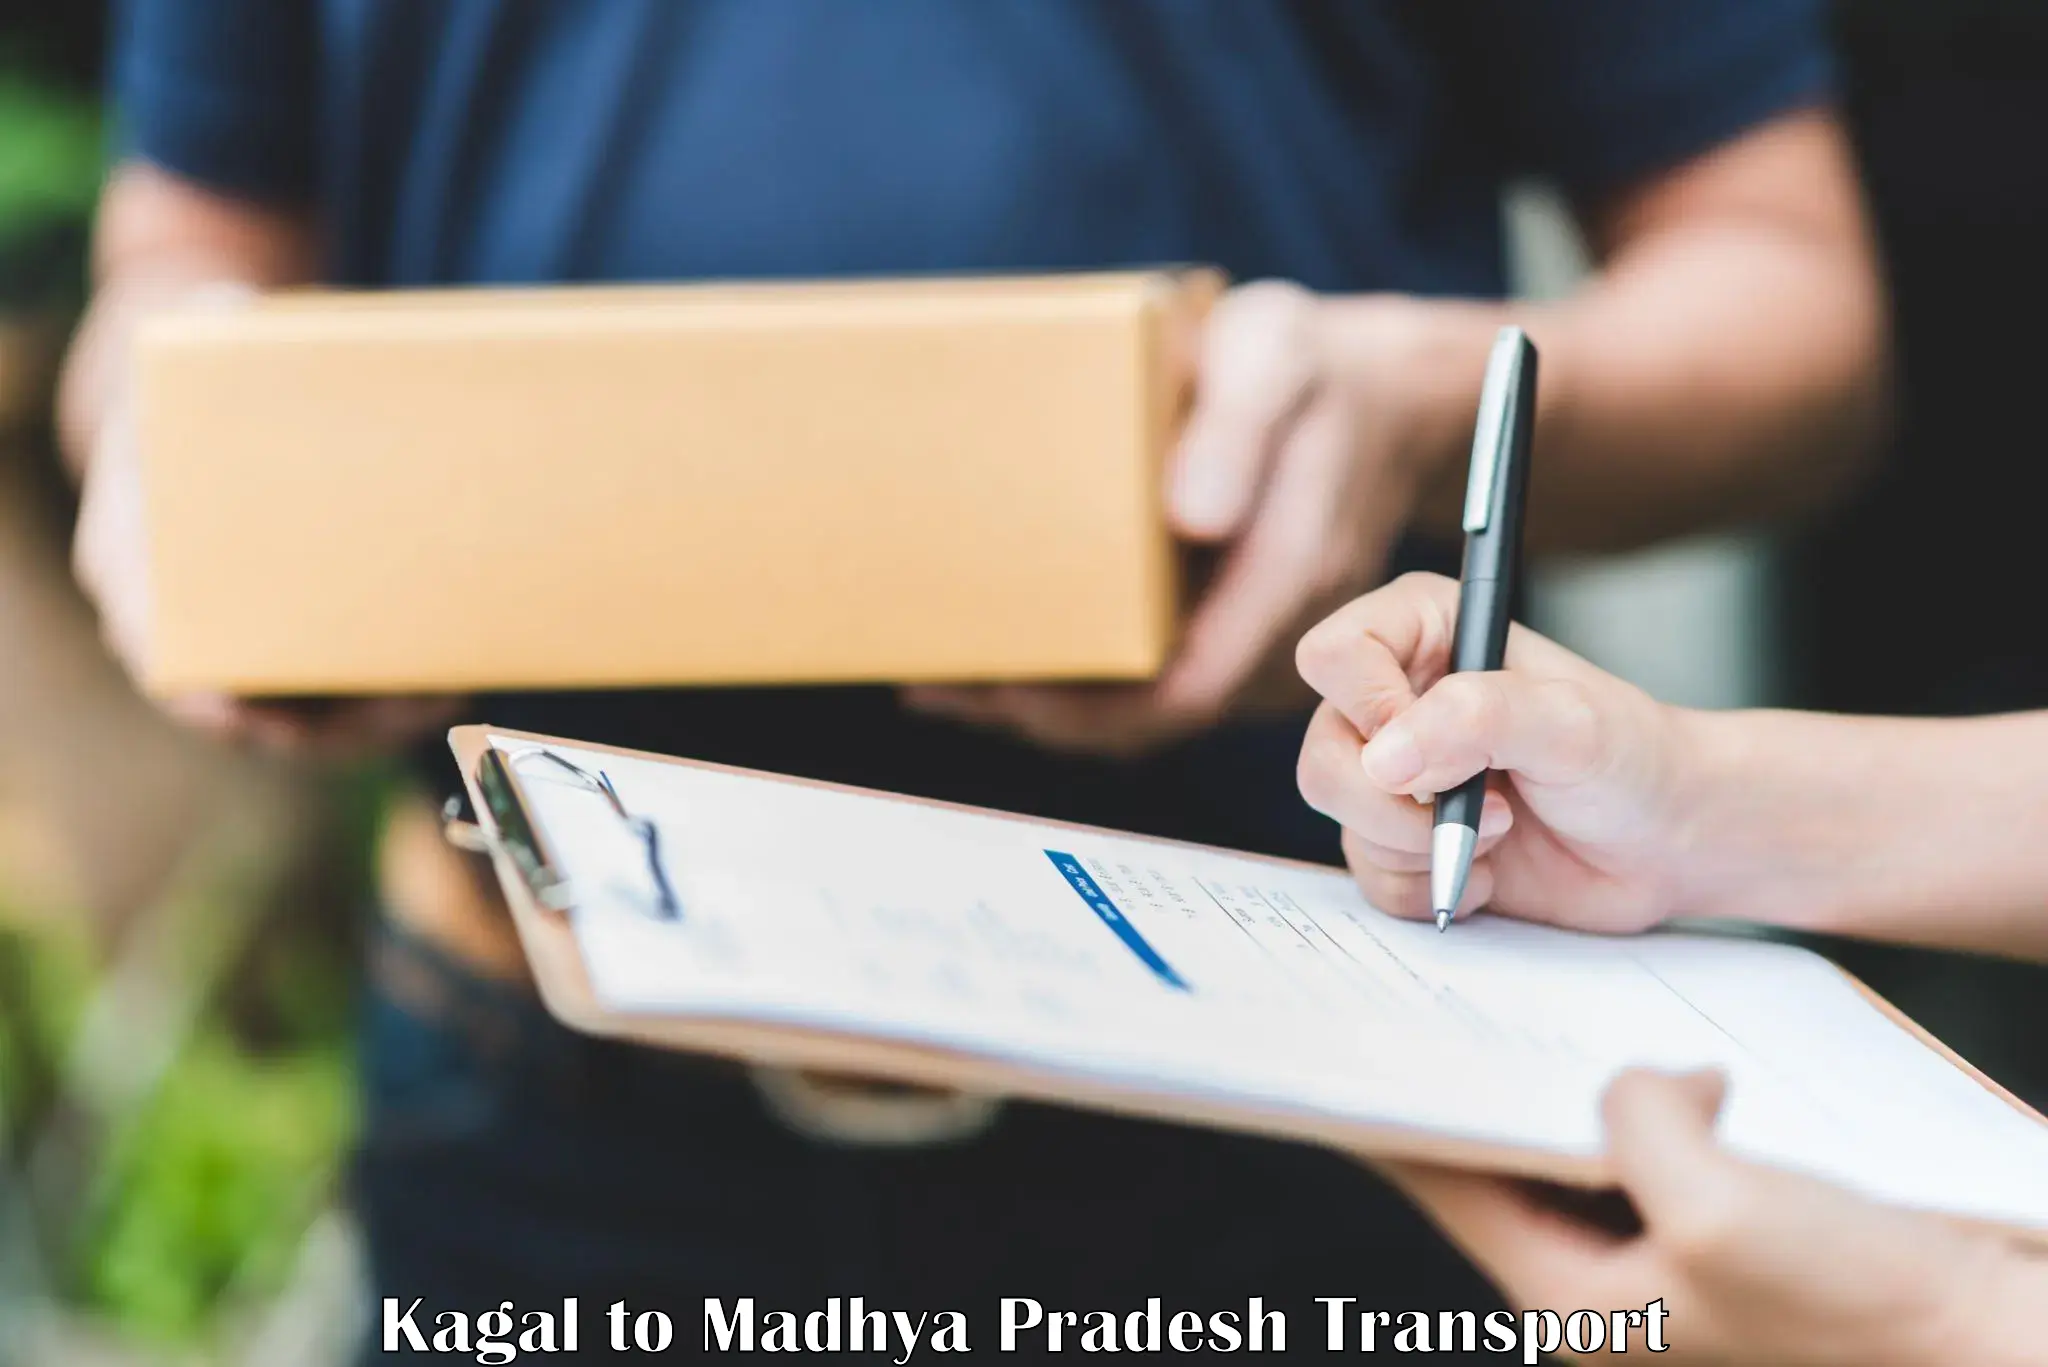 Nationwide transport services Kagal to IIIT Bhopal